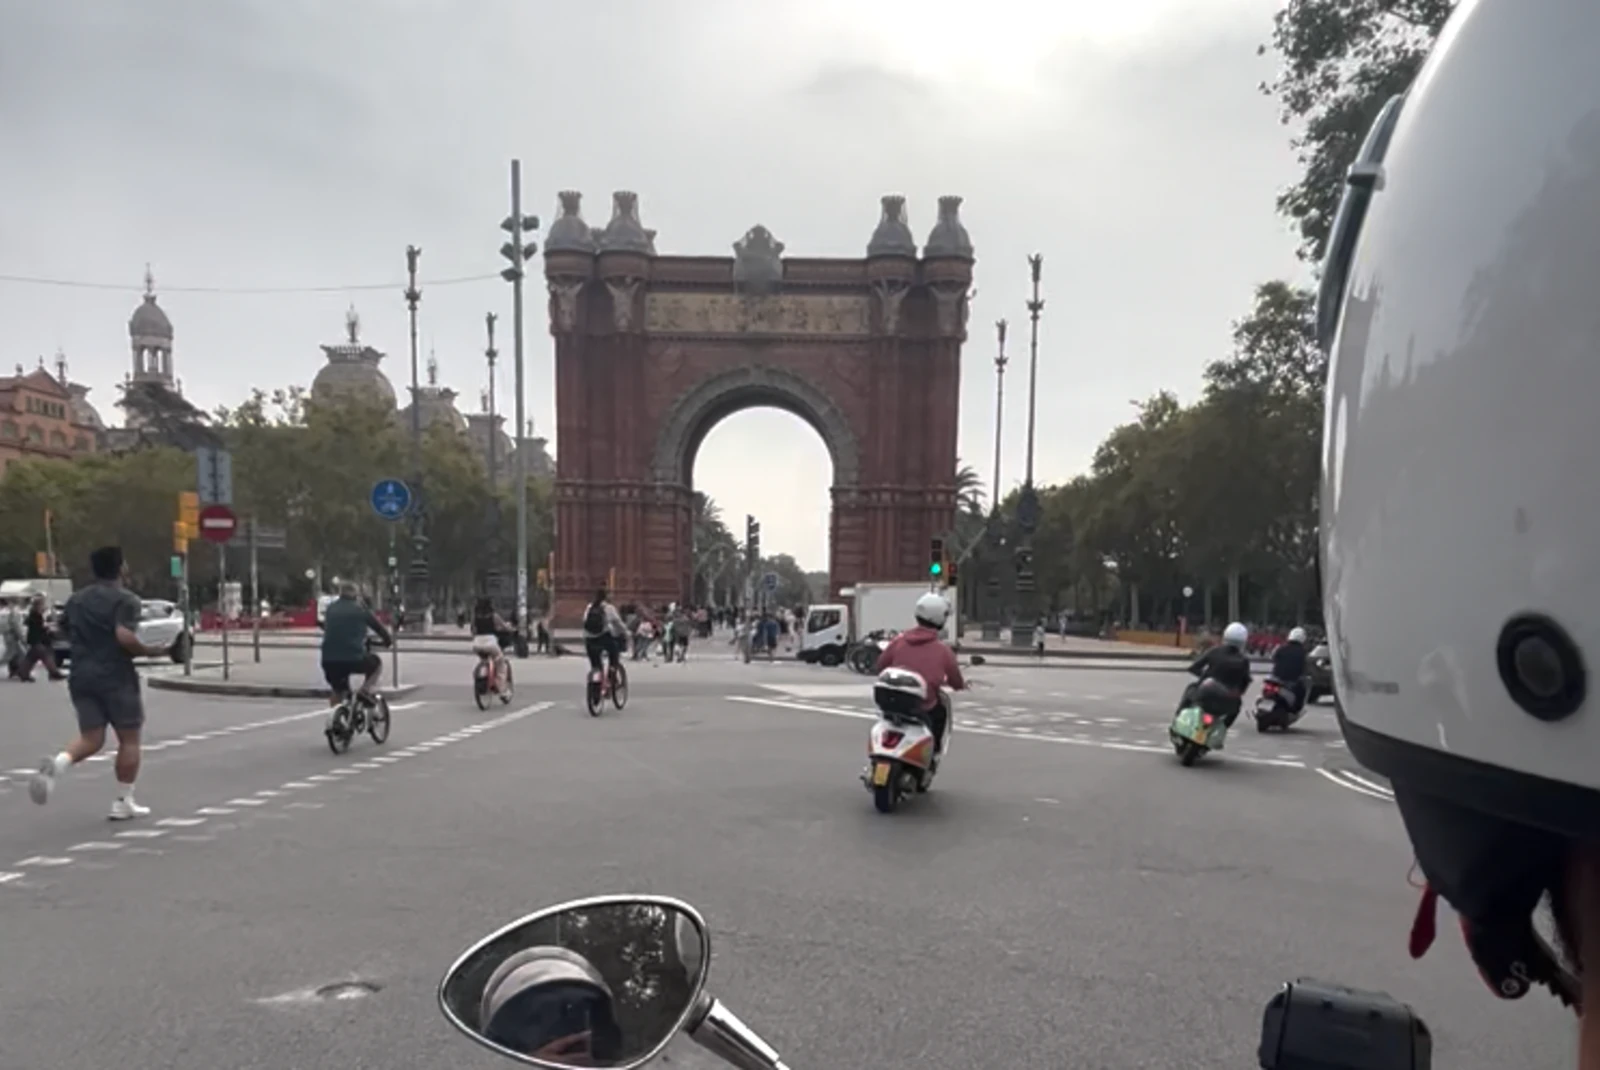 on a moped in front of an arch over the road